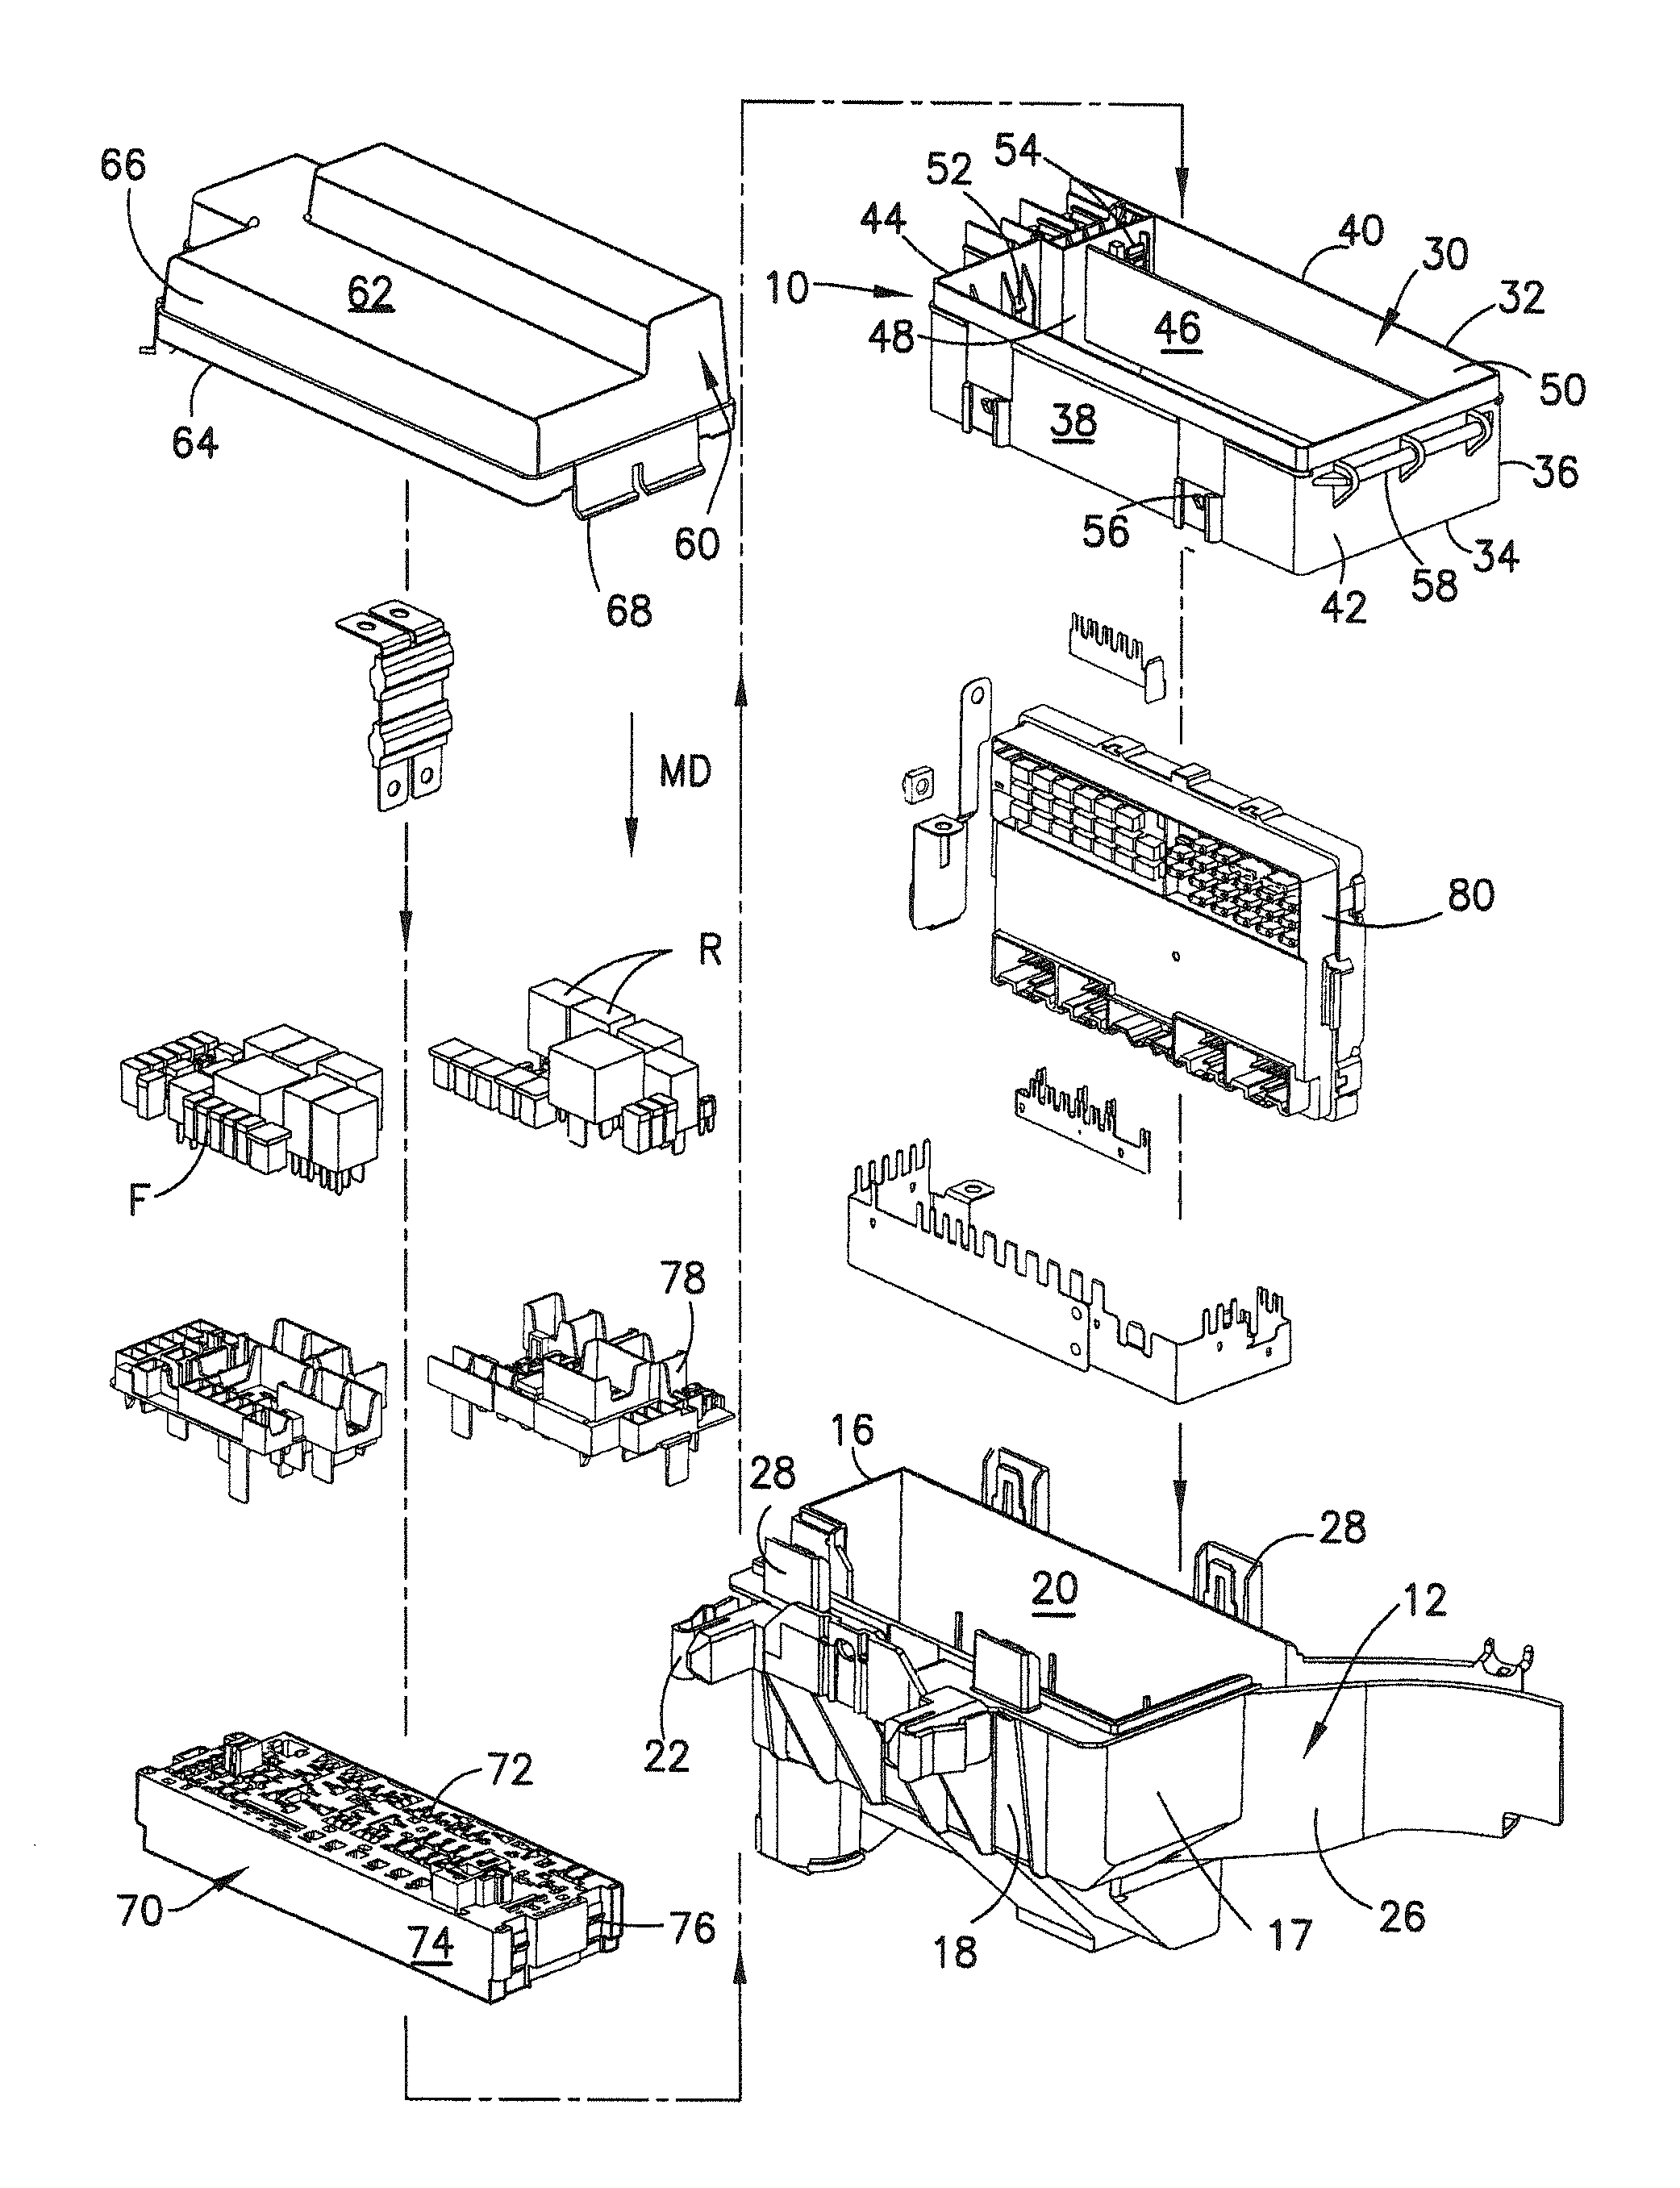 Automotive fuse and relay block assembly